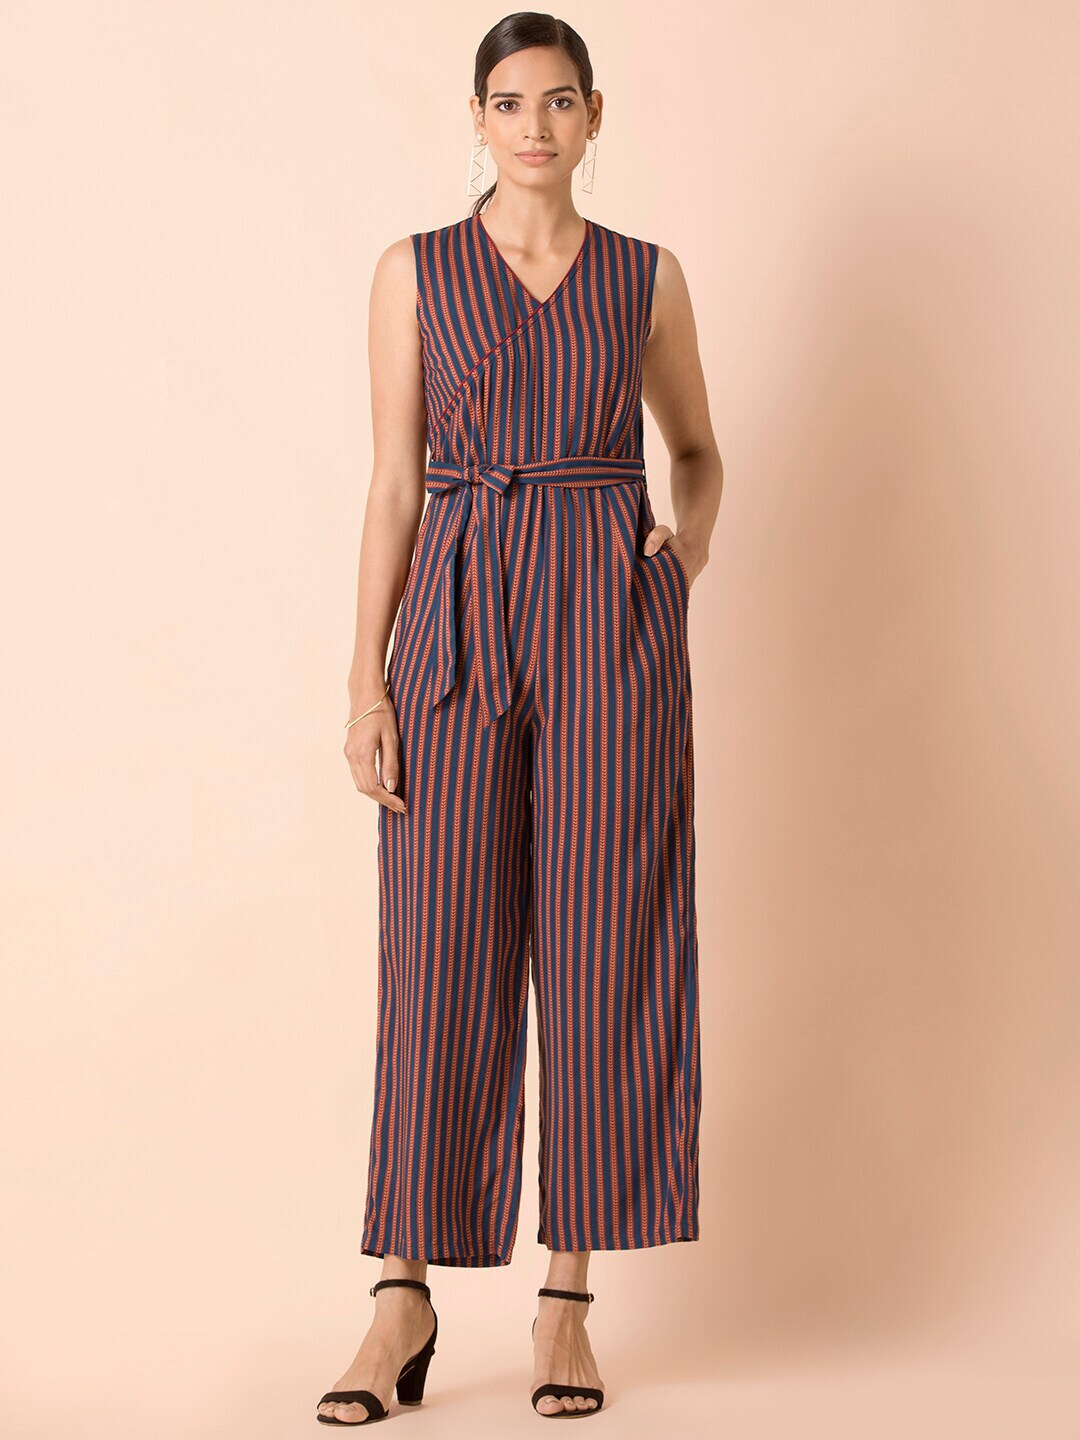 INDYA Maroon & Navy Blue Striped Basic Jumpsuit with Waist Tie-Ups Price in India